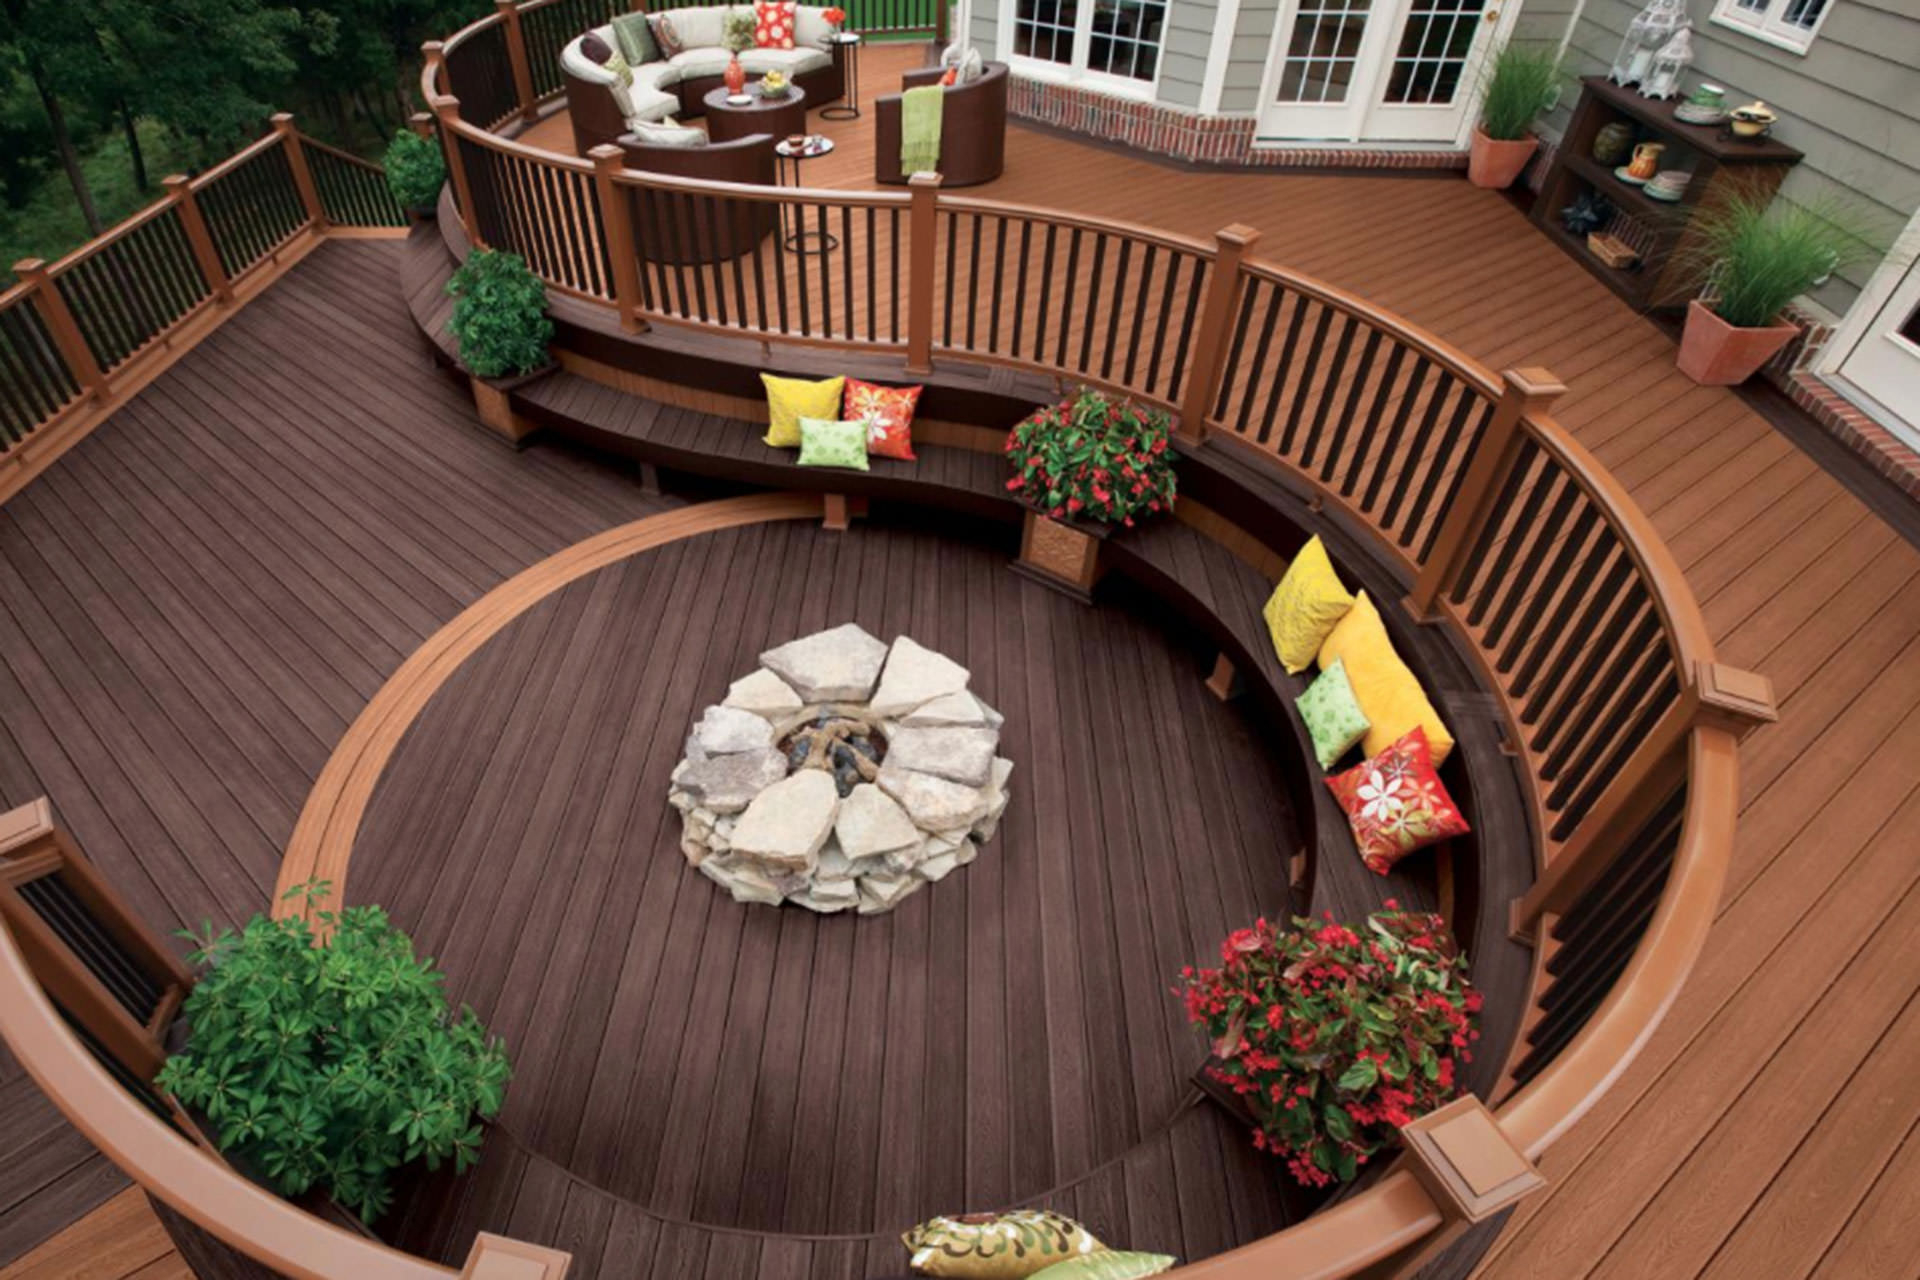 Wood Composite Or Pvc A Guide To Choosing Deck Materials intended for size 1920 X 1280